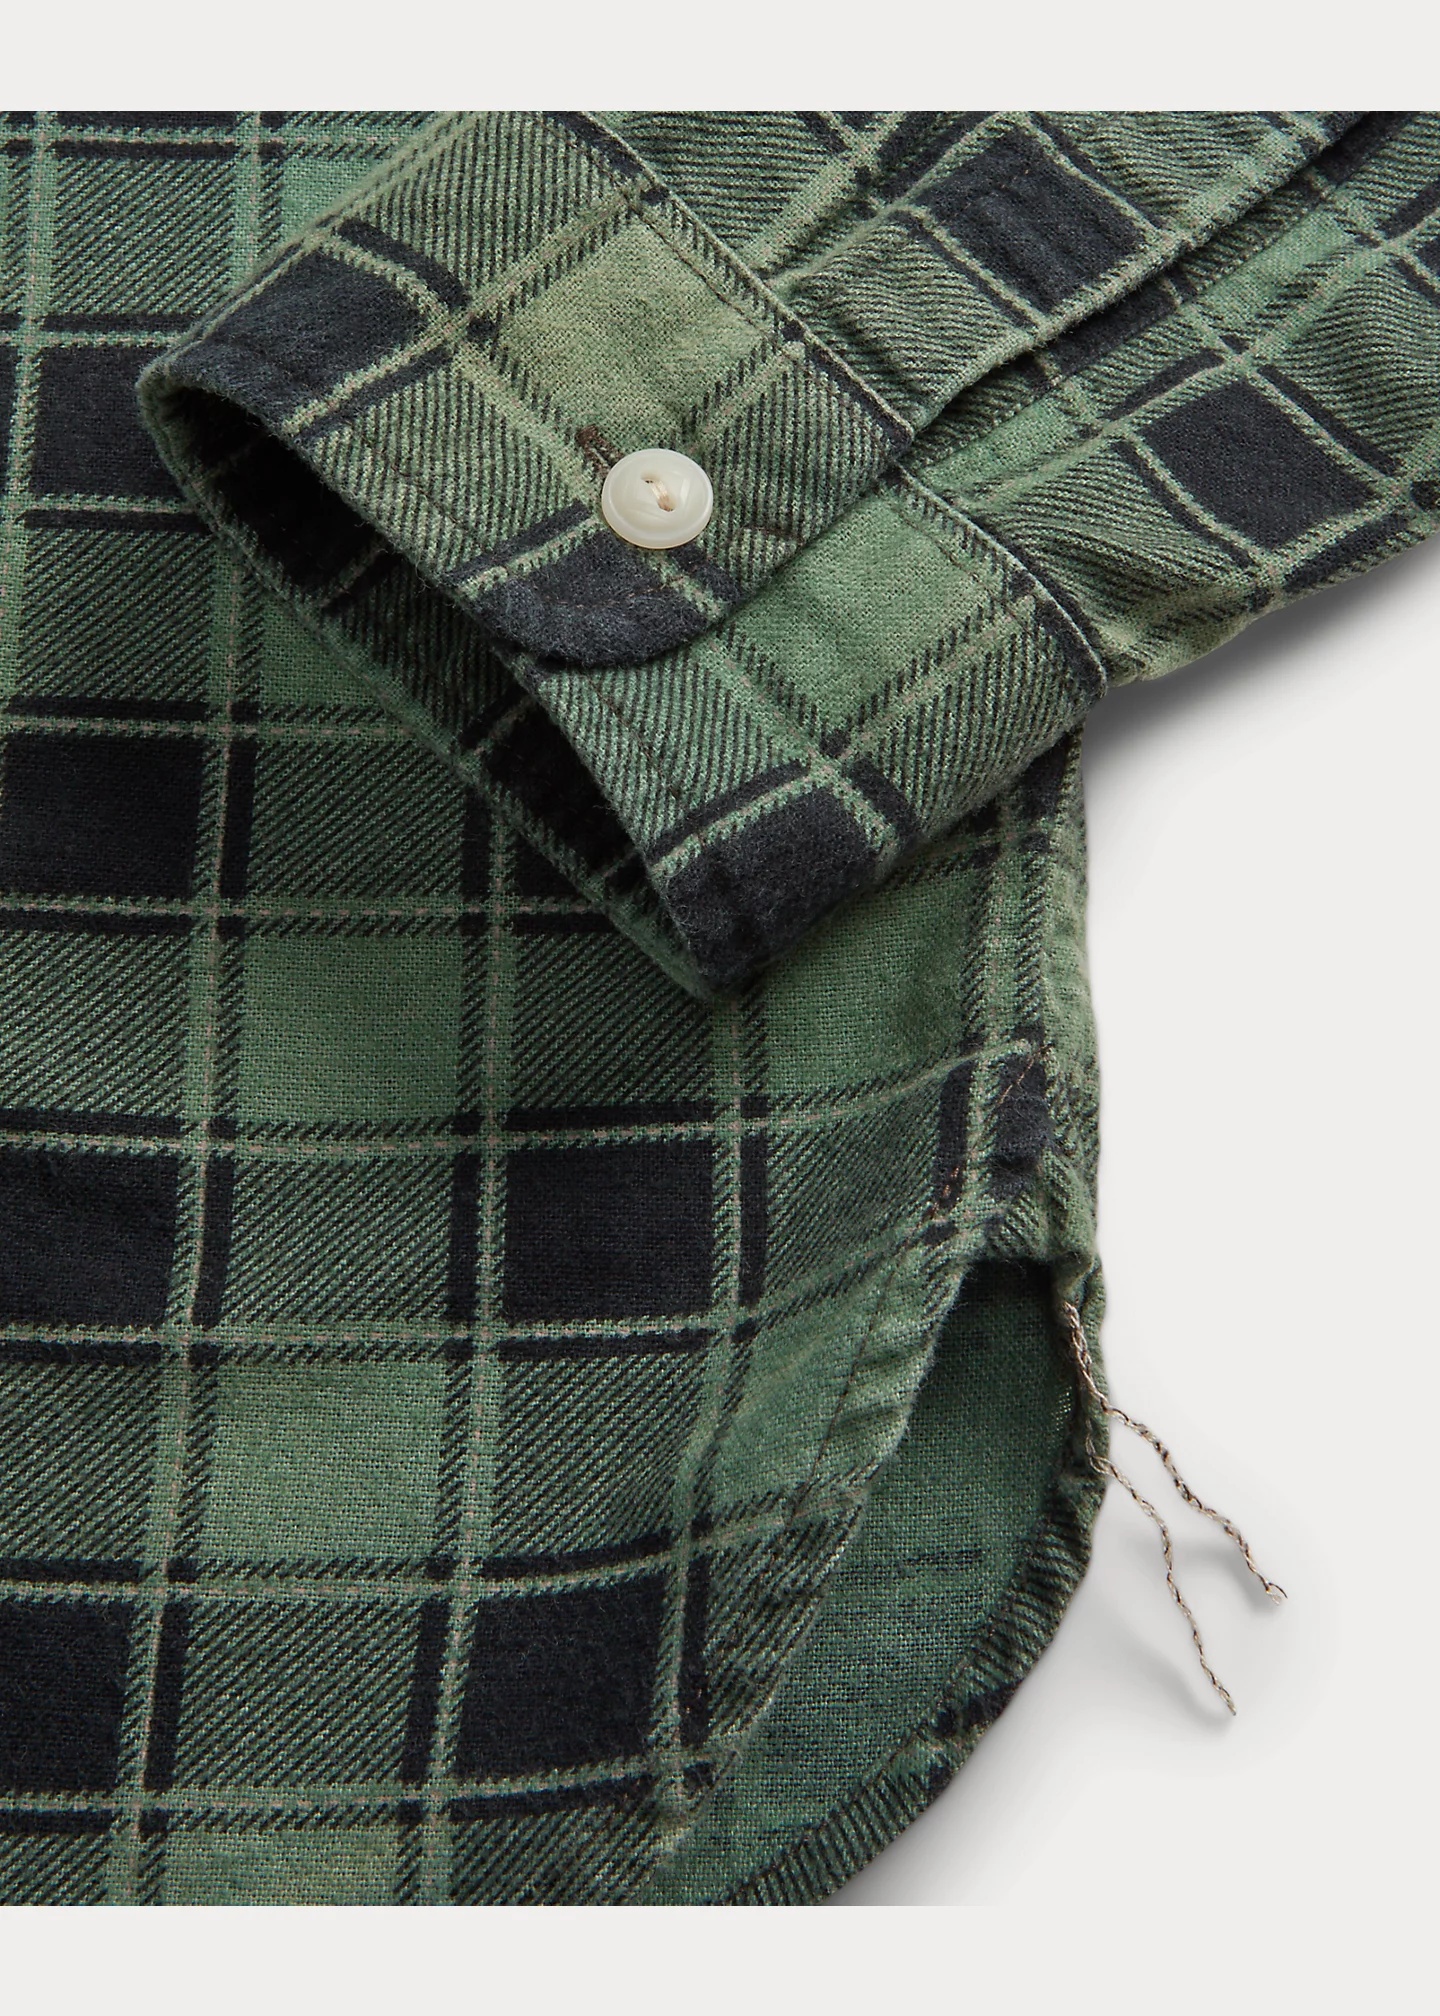 Green Plaid Quilted Flannel Shirt